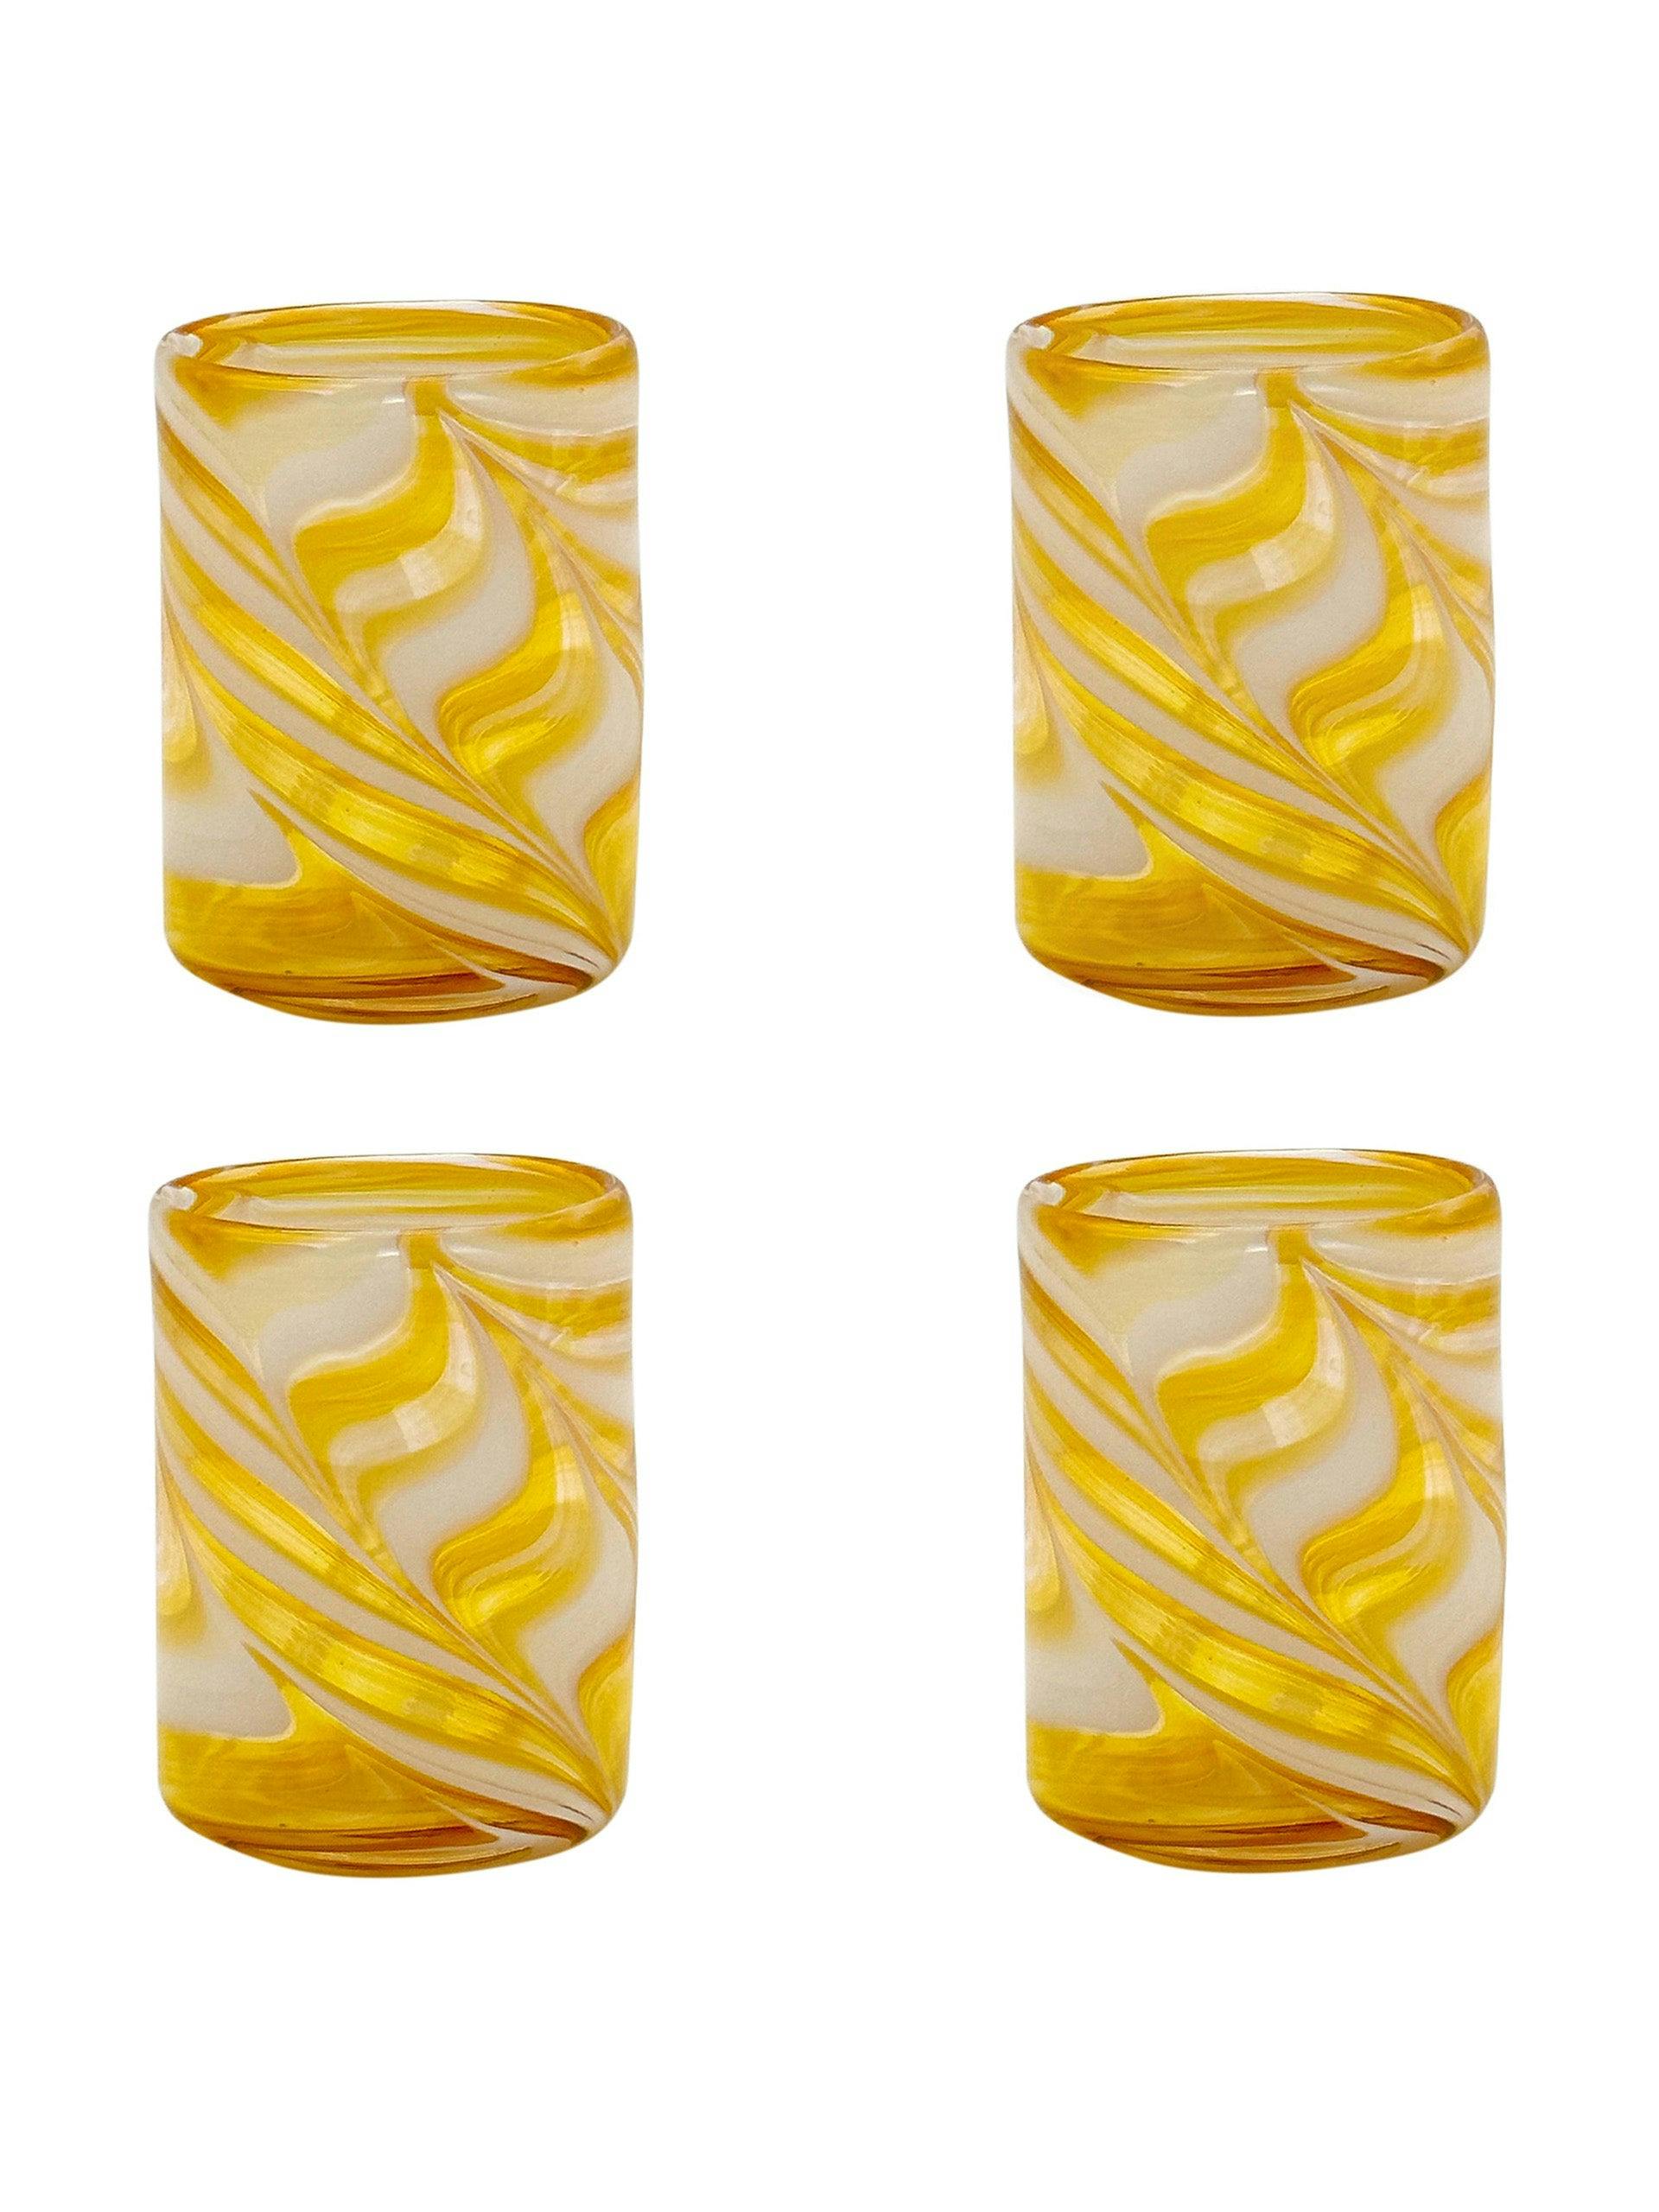 Bellotto tumblers in Tobacco (set of 4)